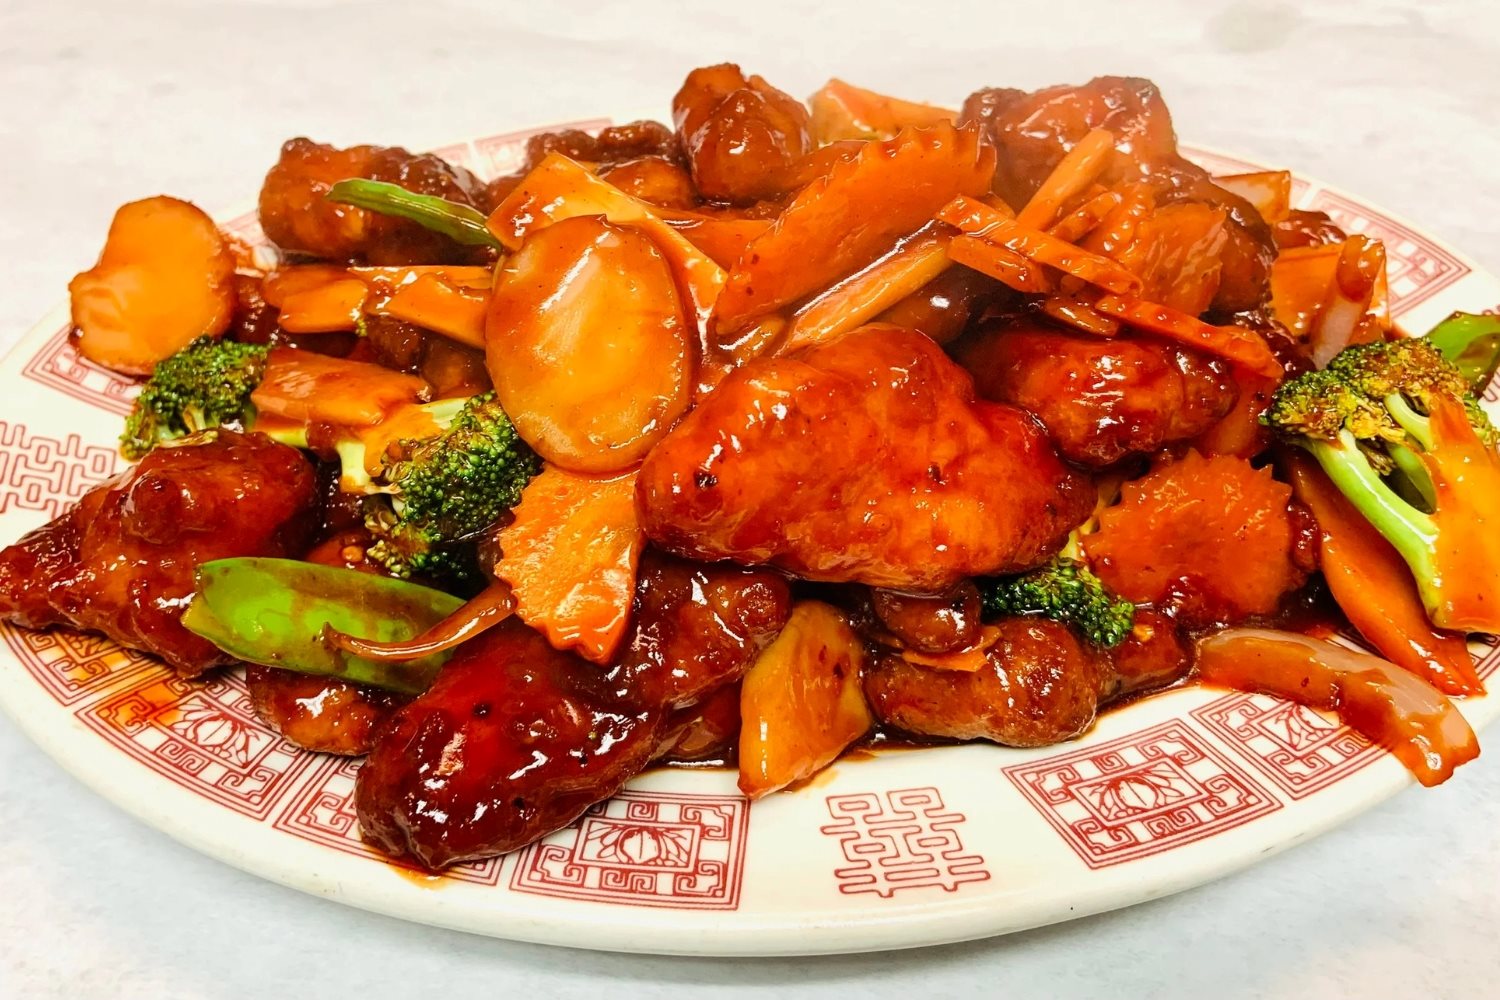 Discover The Irresistible Delight Of Empress Chicken On A Chinese Takeout Menu